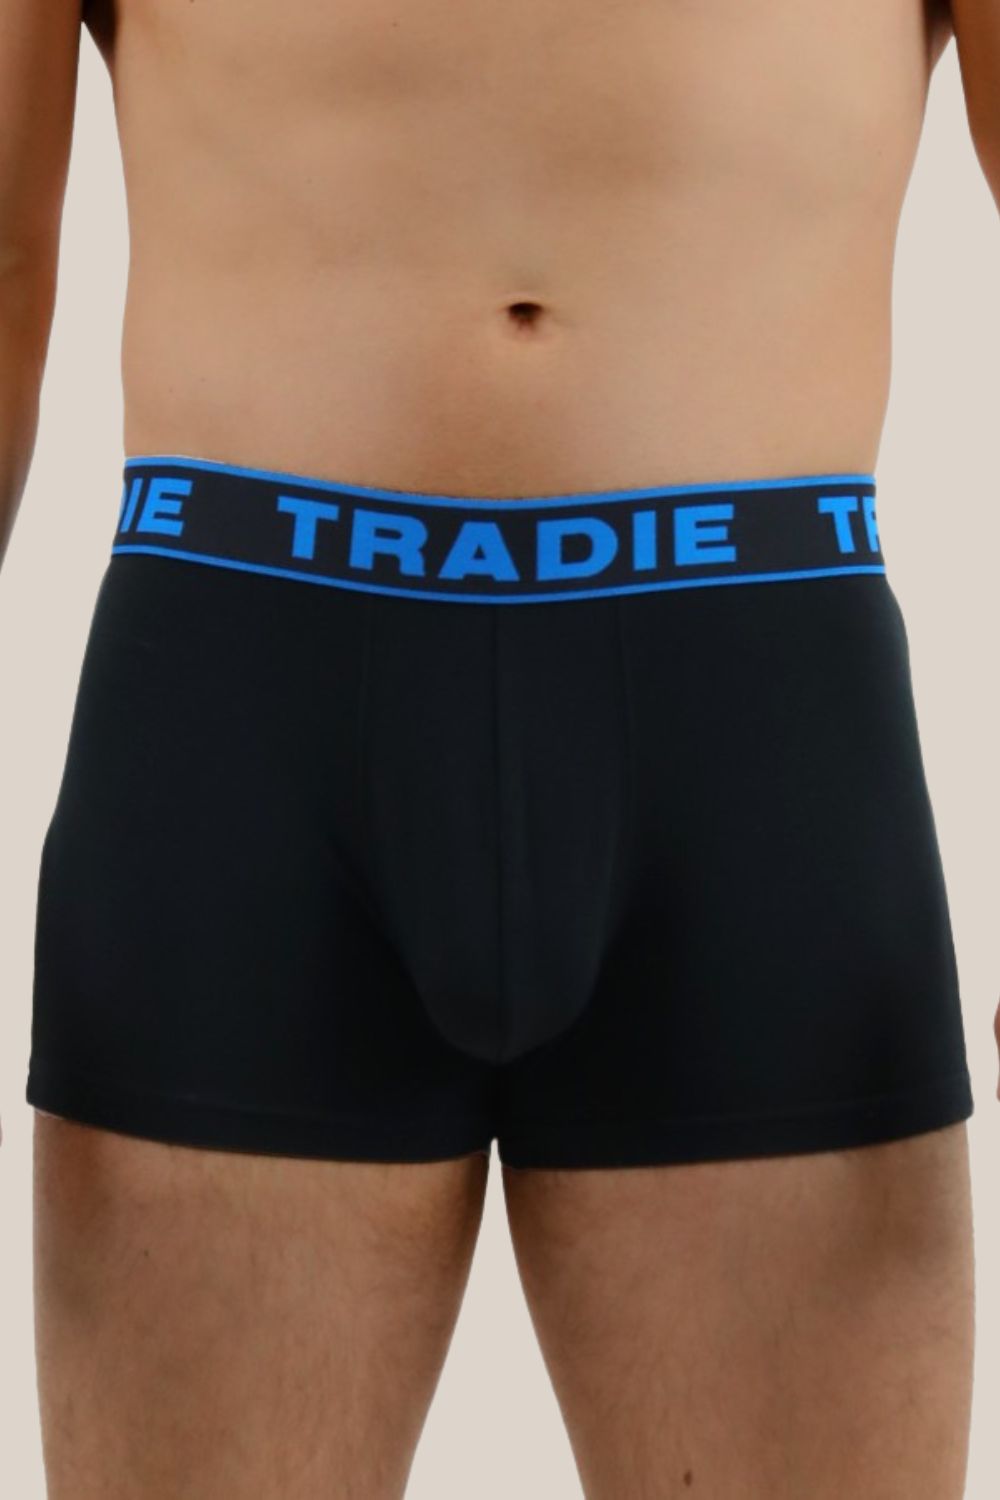 Tradie Mens 3PK Bamboo Fitted Trunk